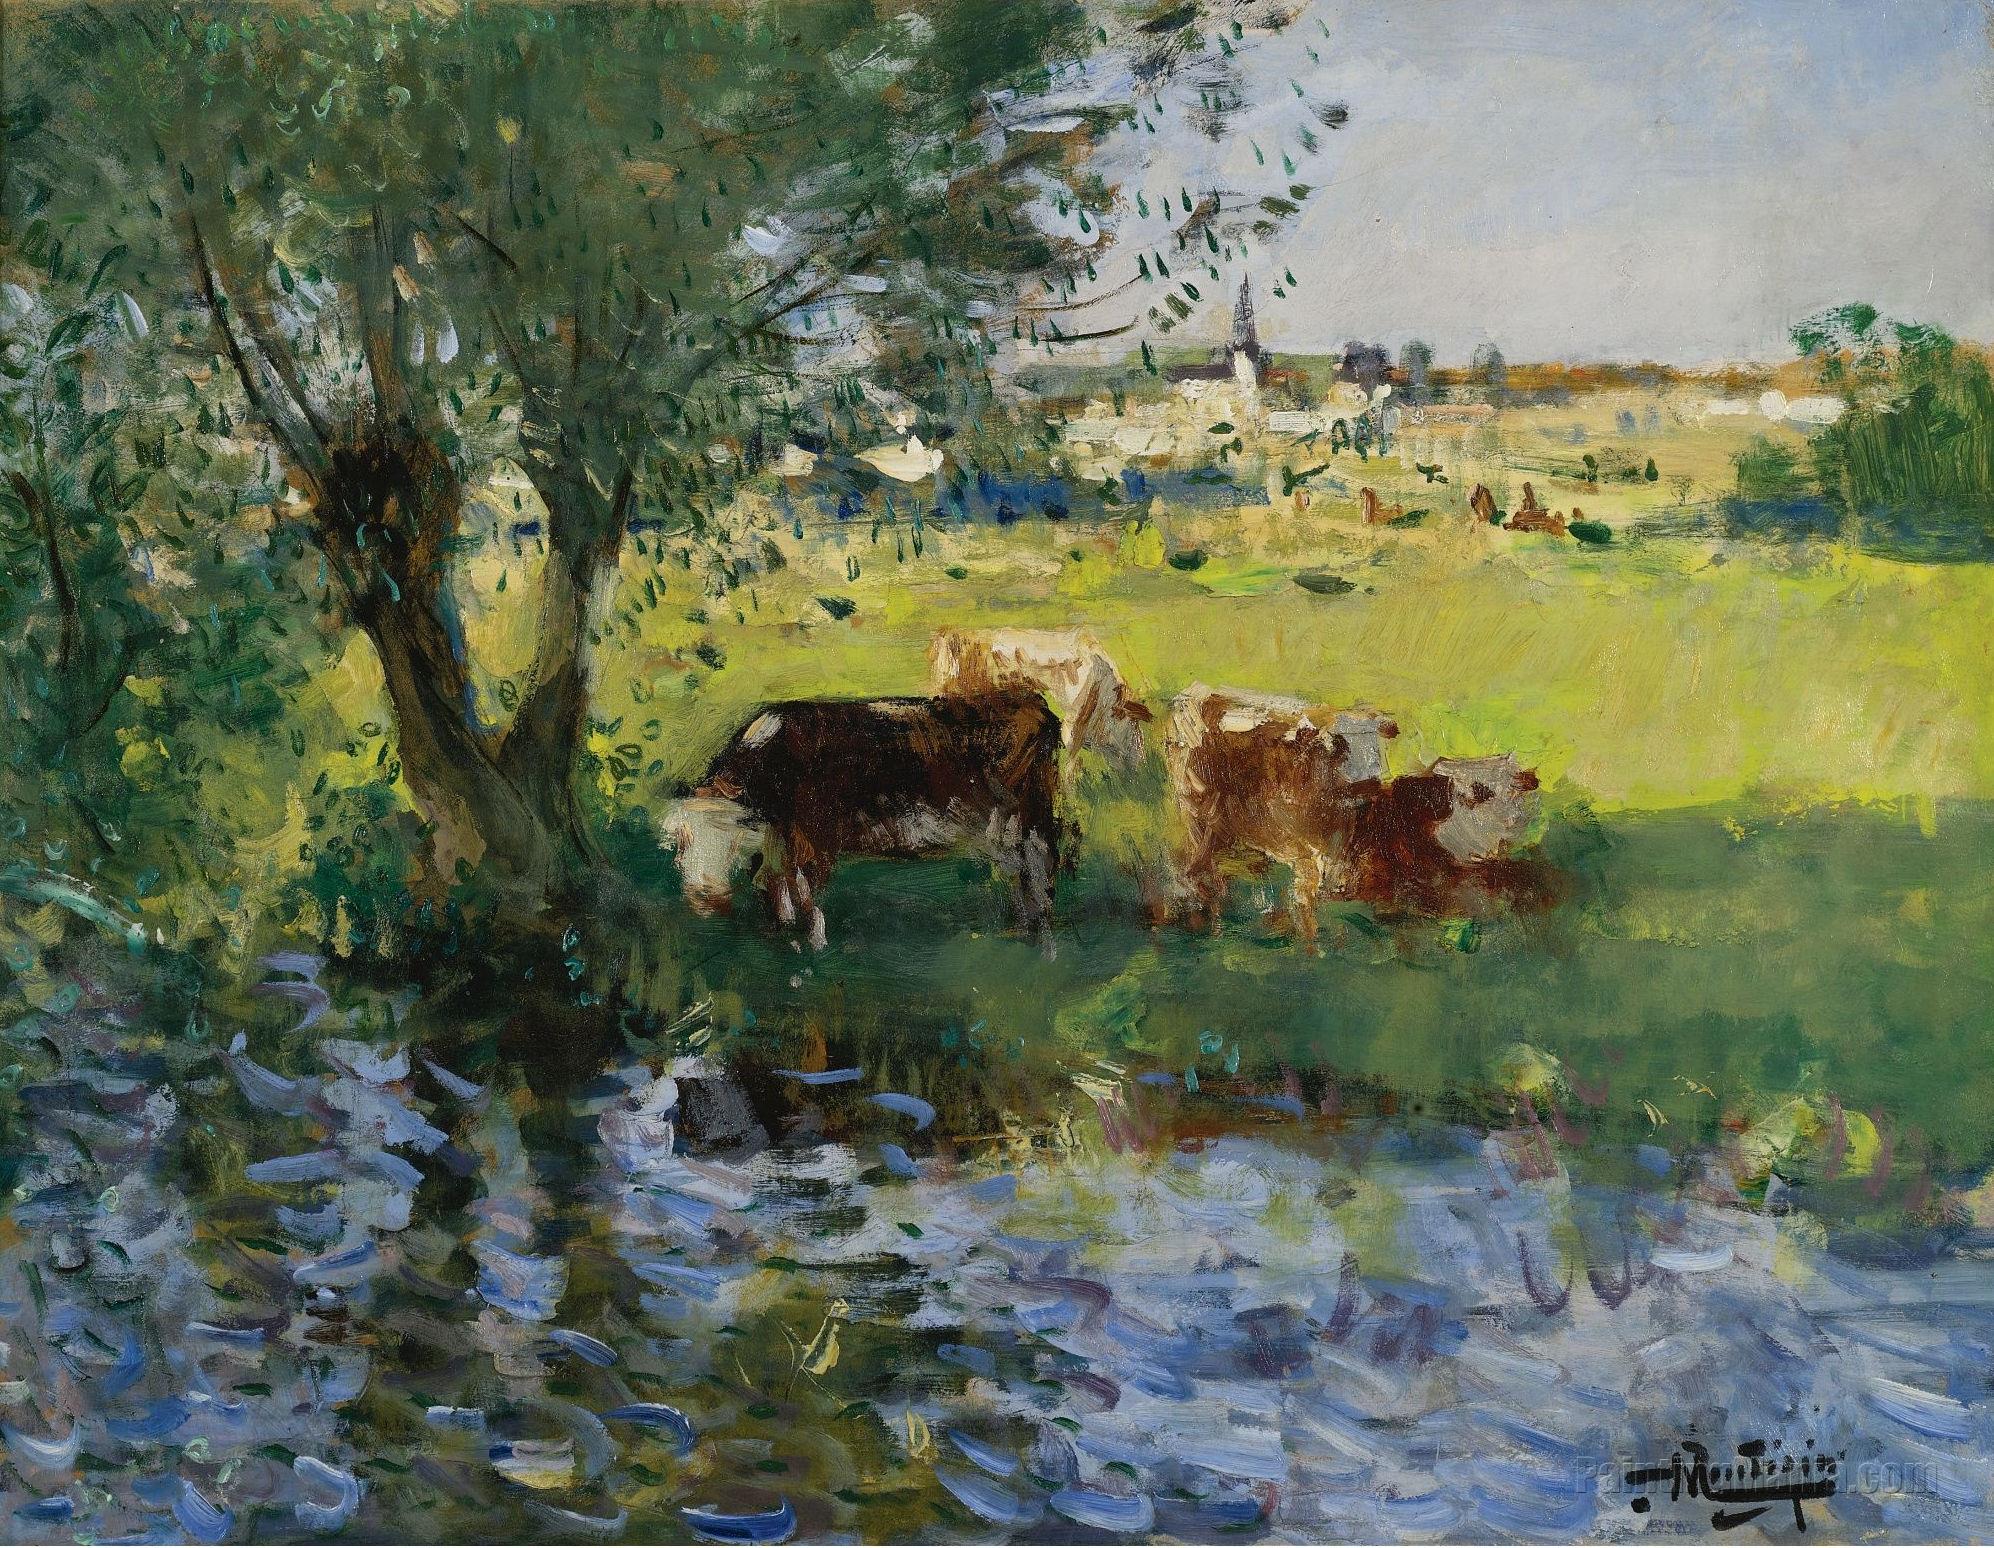 Cows in the Willow's Shade